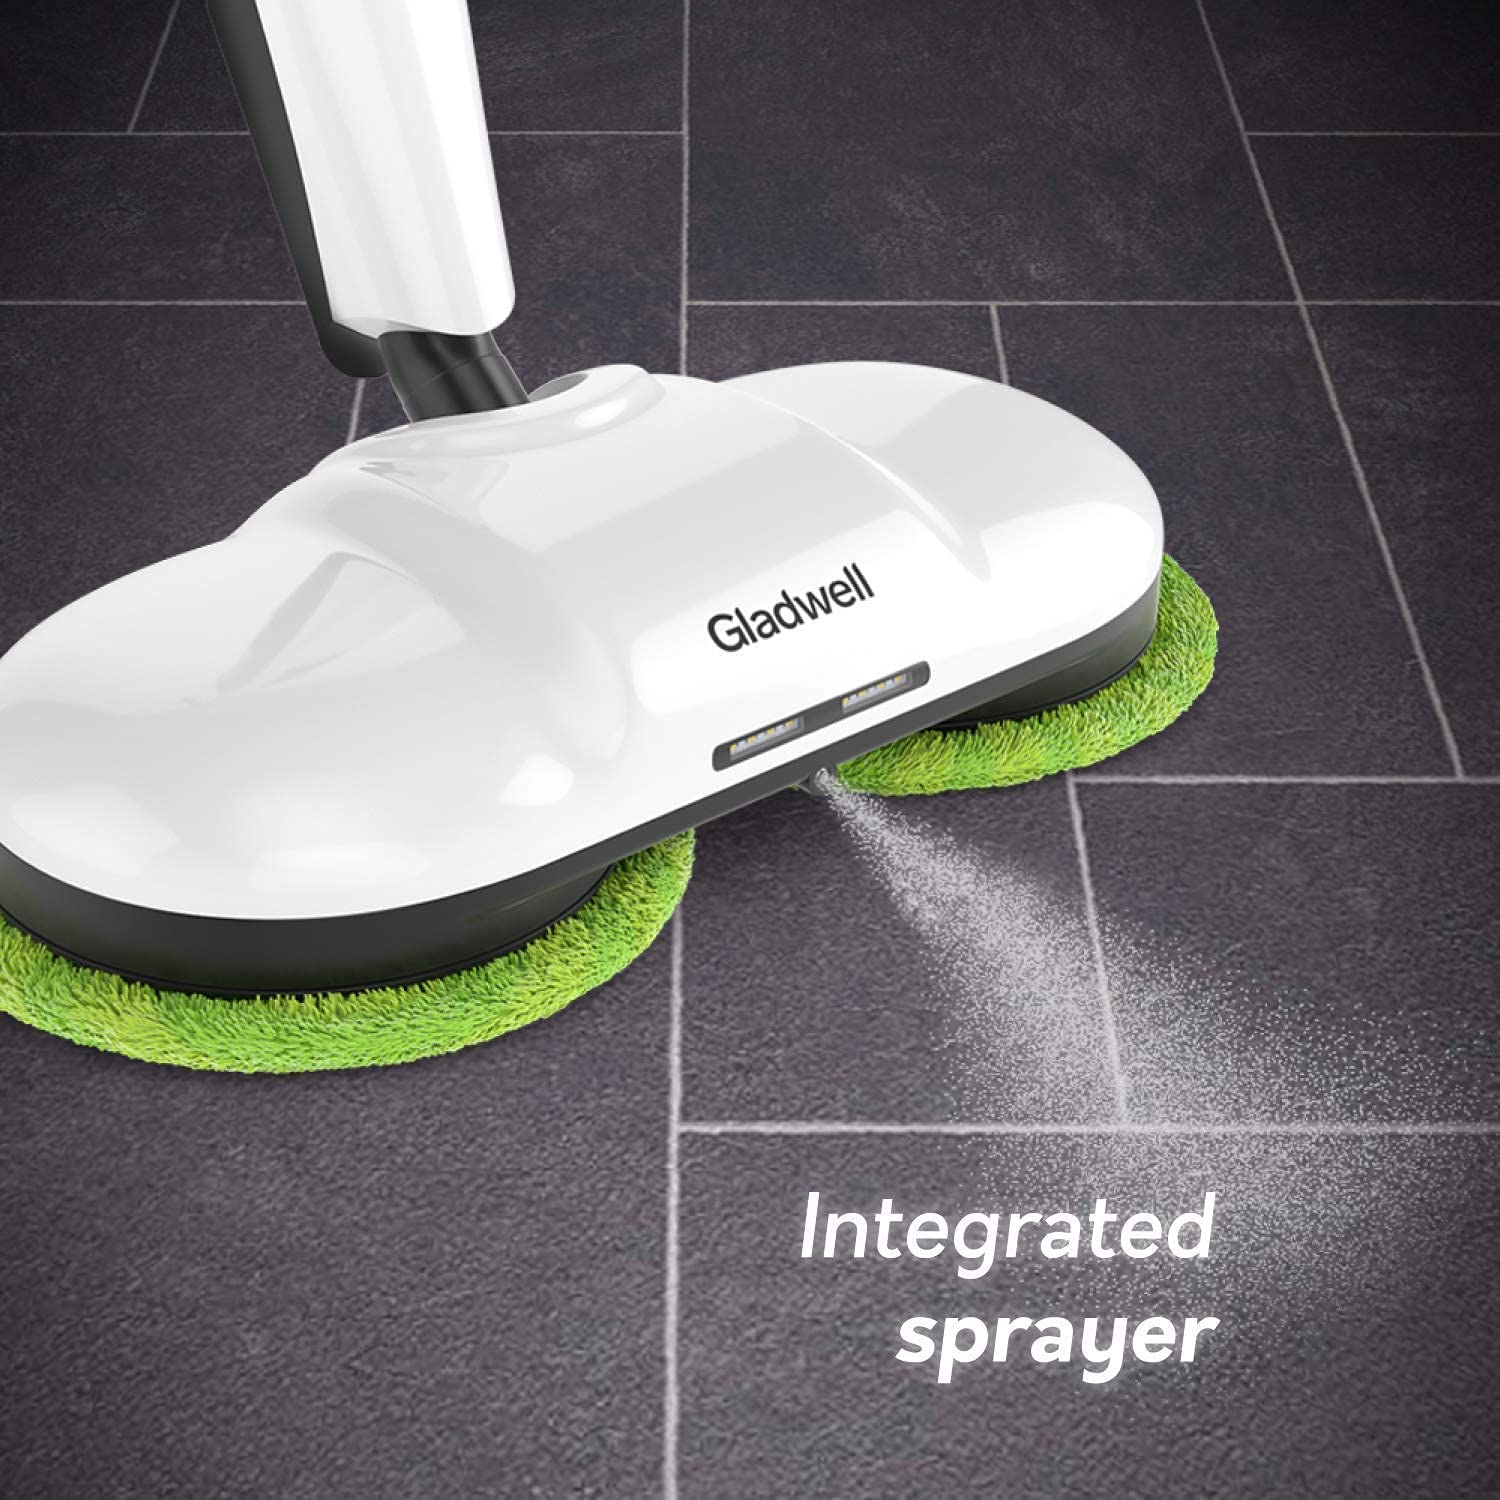 Mop Electric Sweeper Cordless Spin Mop Floor Polisher Rechargeable Powered  Scrubber Vacuum Cleaner Electric Home Cleaning